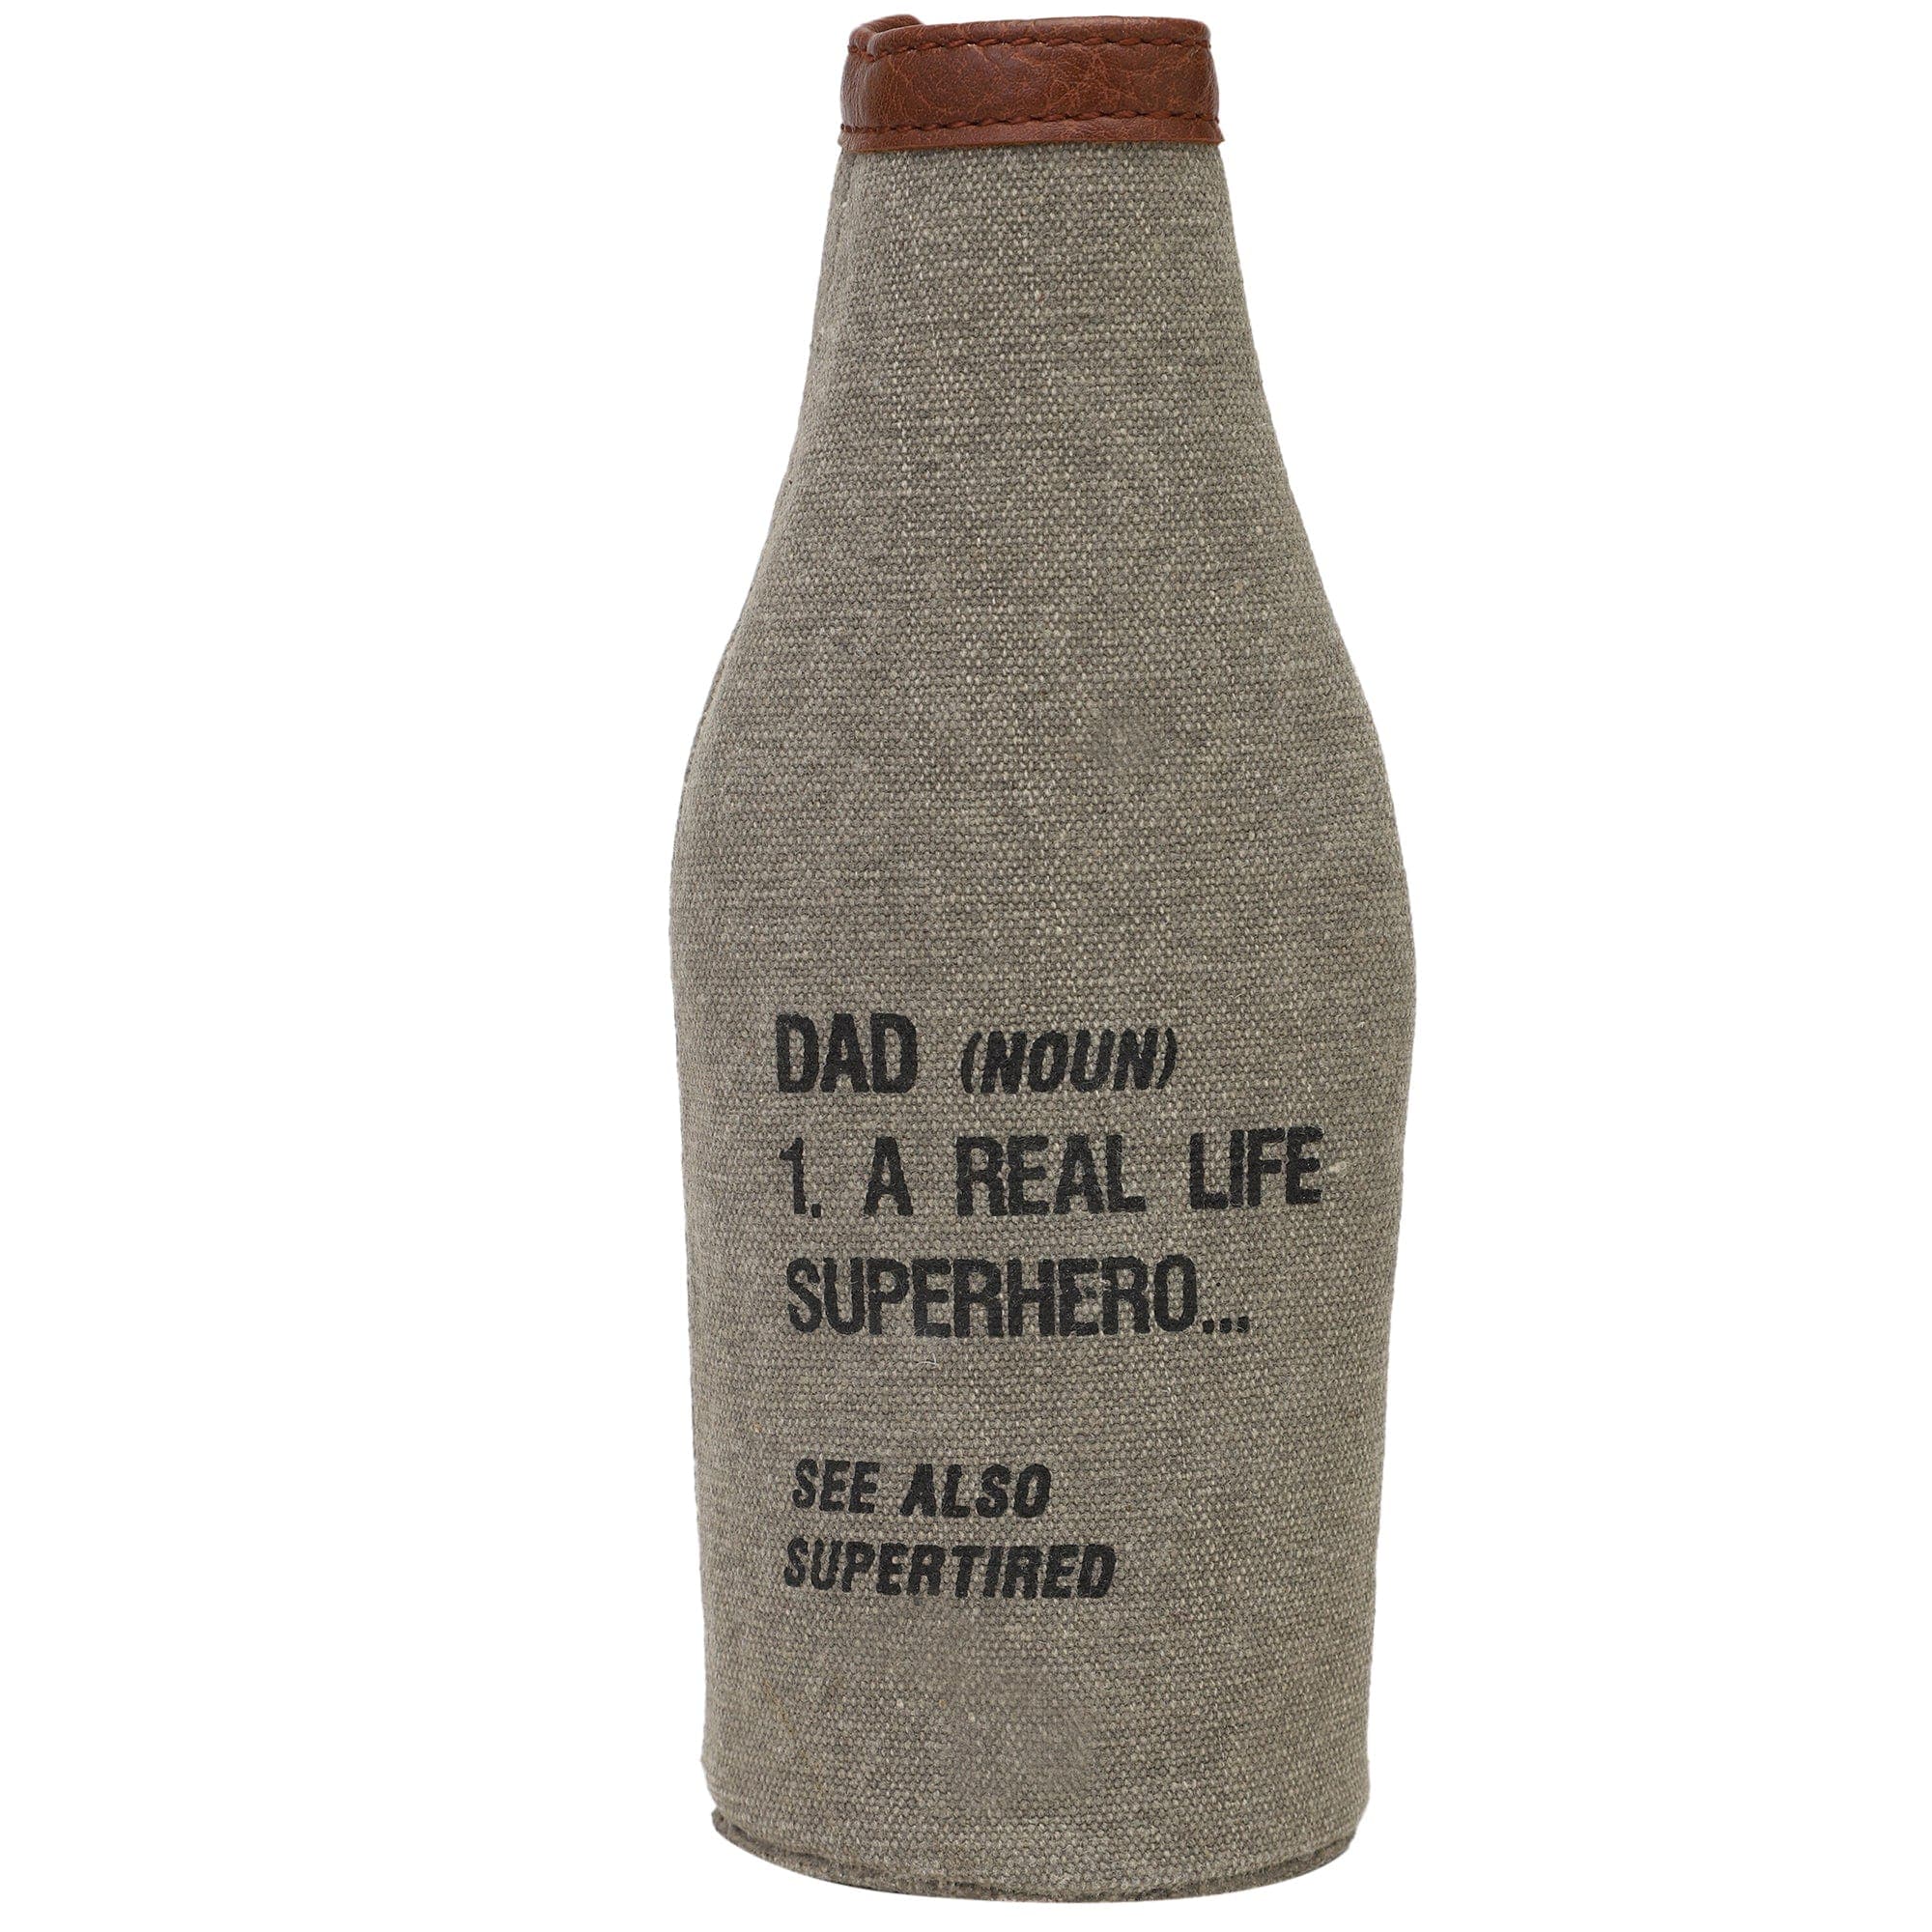 Mona-B Bag Mona B Pint Beer Bottle Covers with Stylish Printing for Men and Women (SUPER DAD)